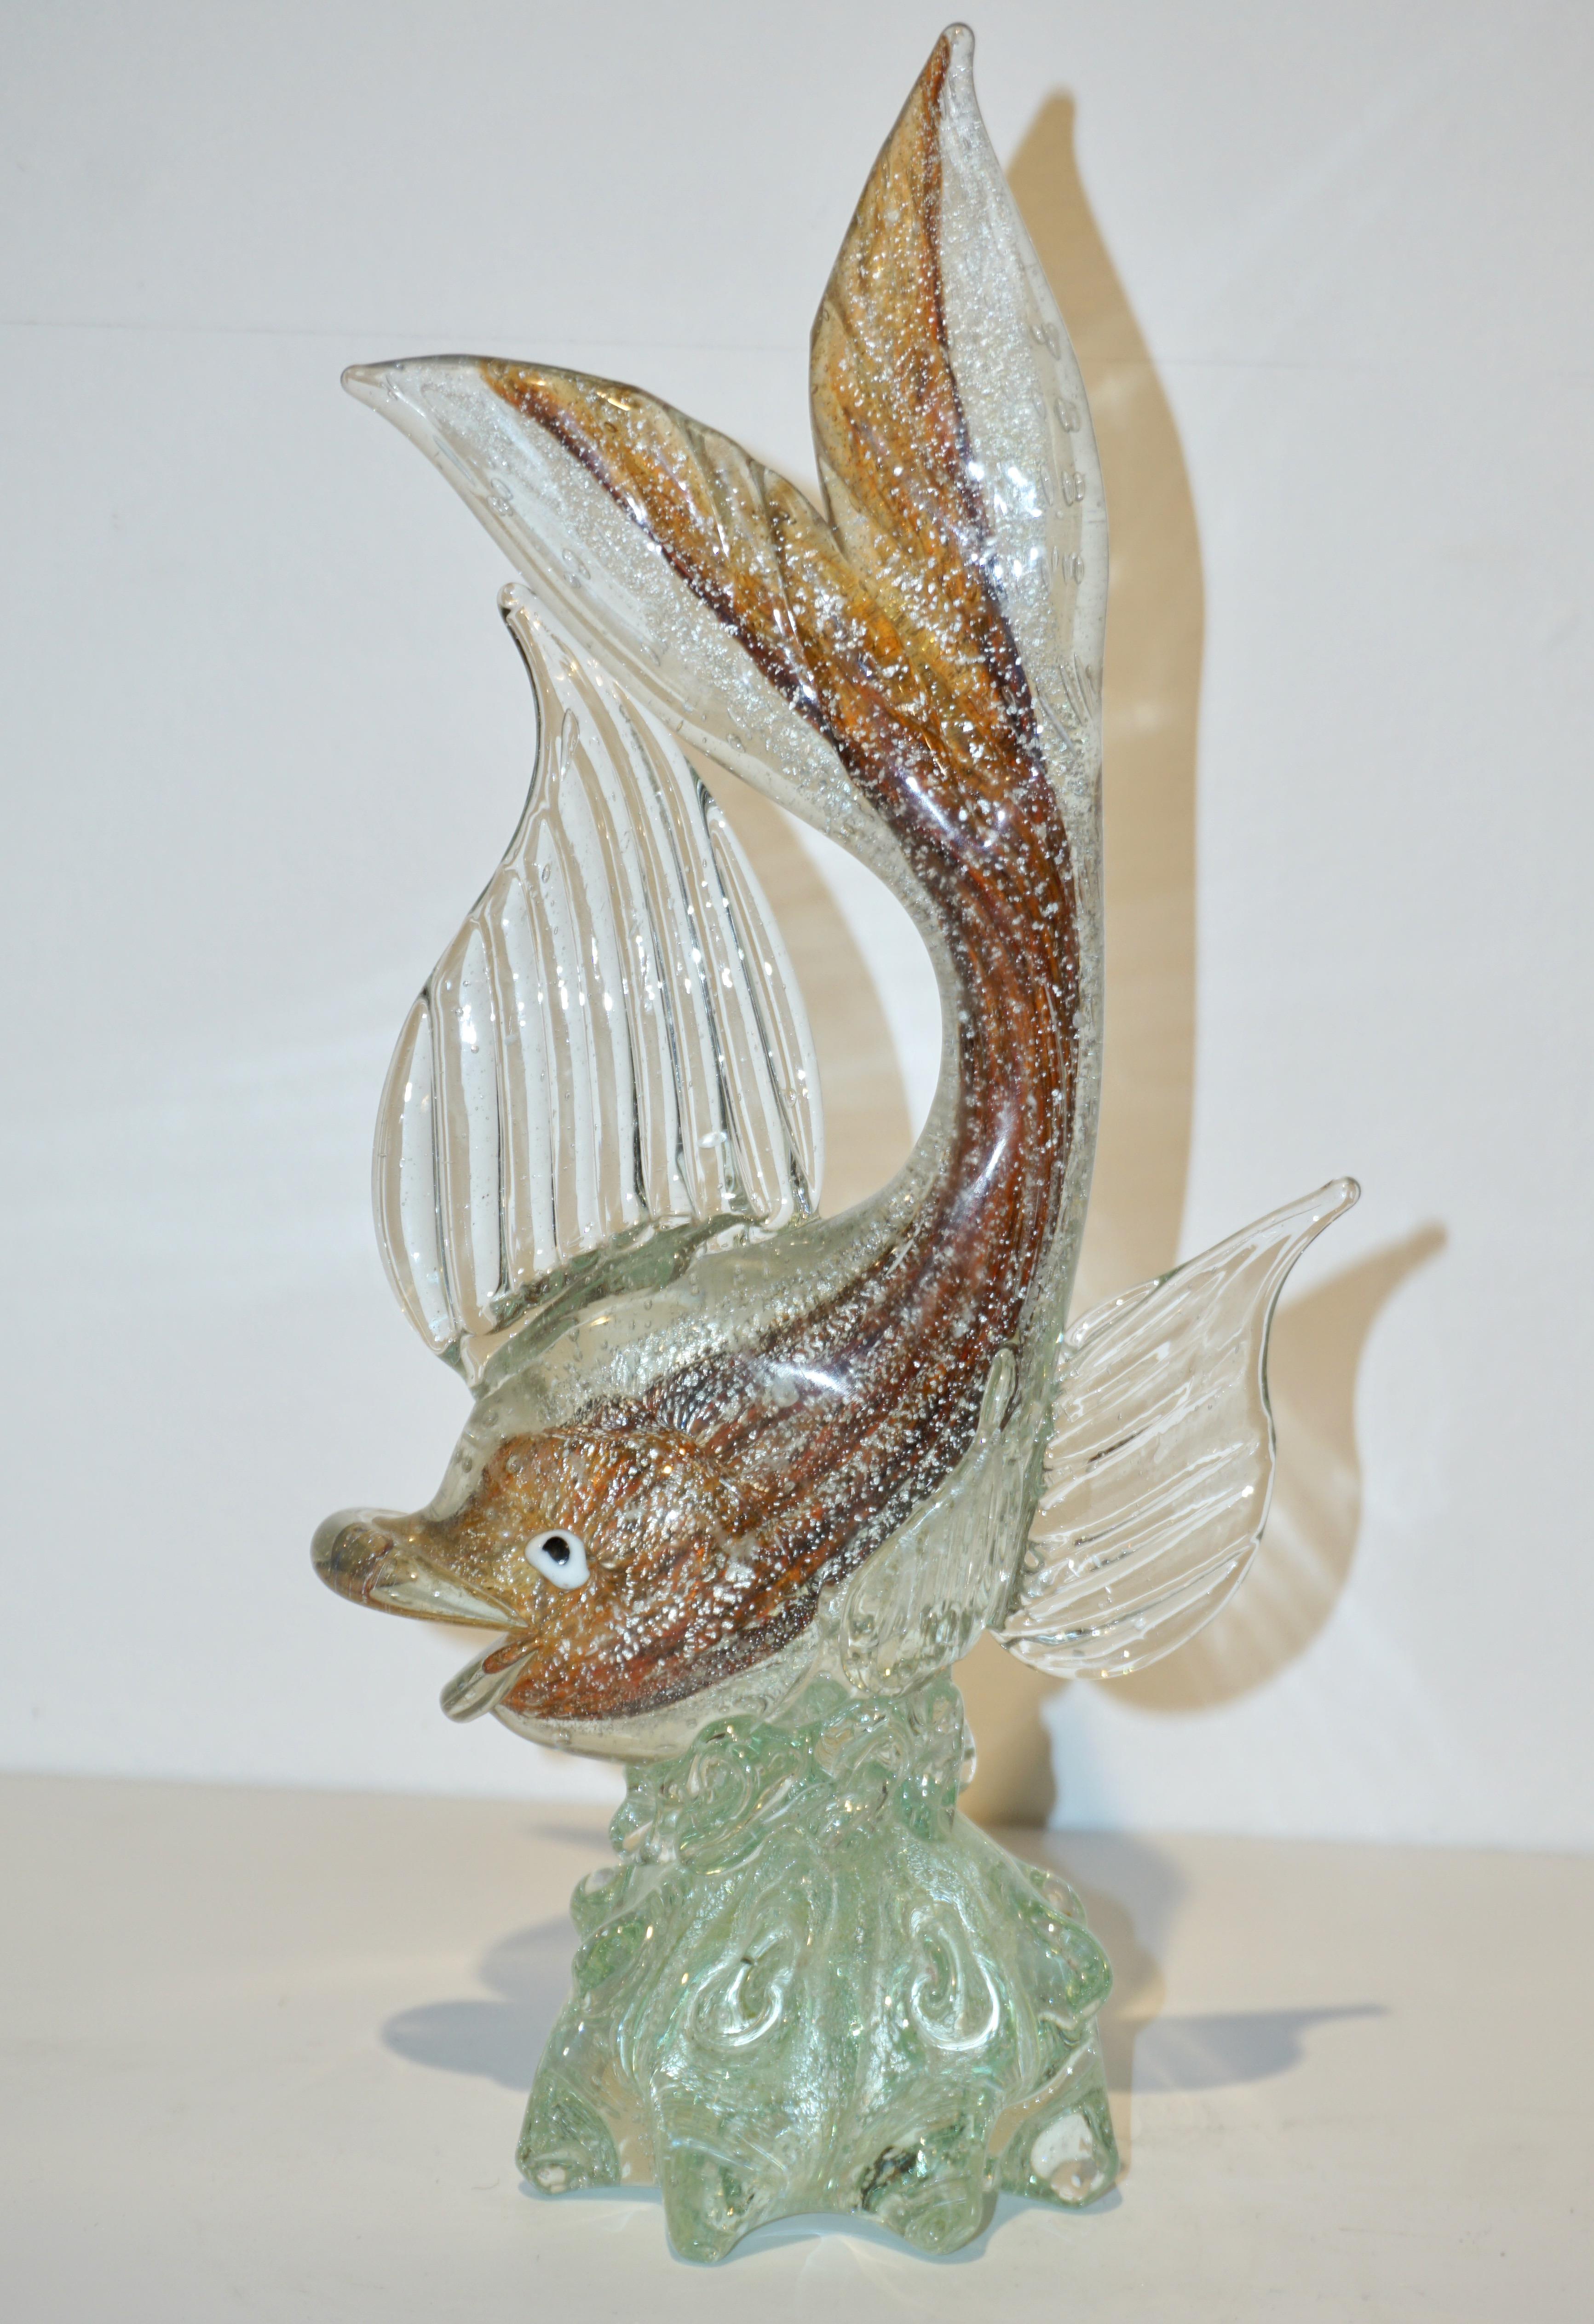 Italian mid-century sculptural Murano glass fish. Realized using the Sommerso technique, a clear layer of glass blown over the amber color glass, worked in bullicante, the air bubbles trapped inside the glass (technique made famous by Archimede